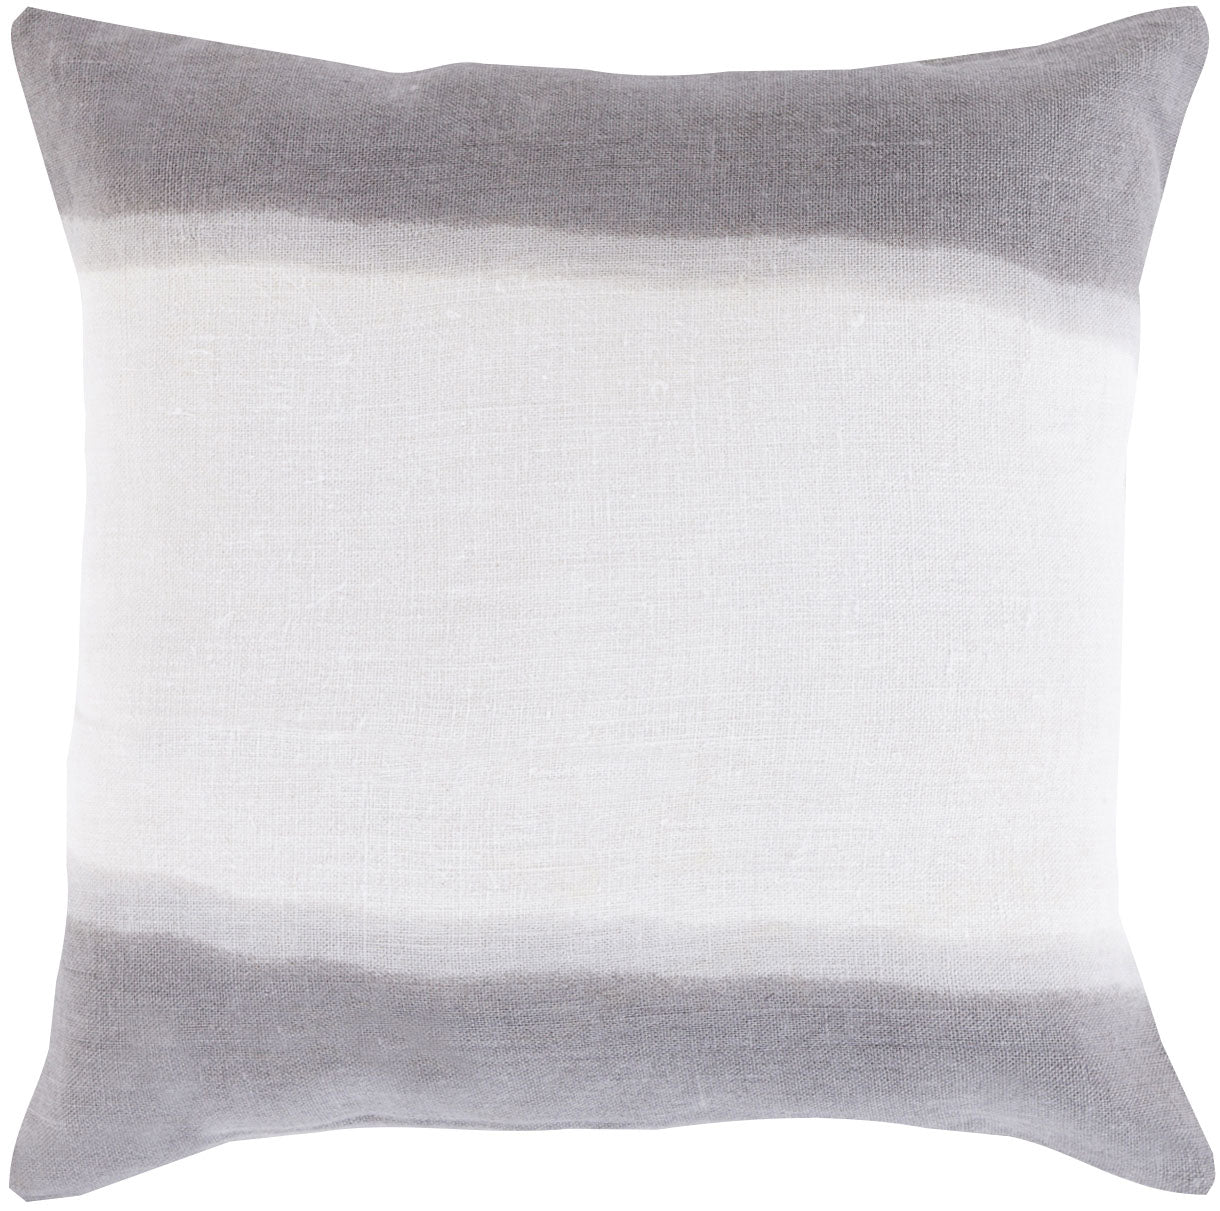 Ravels Charcoal Pillow Cover